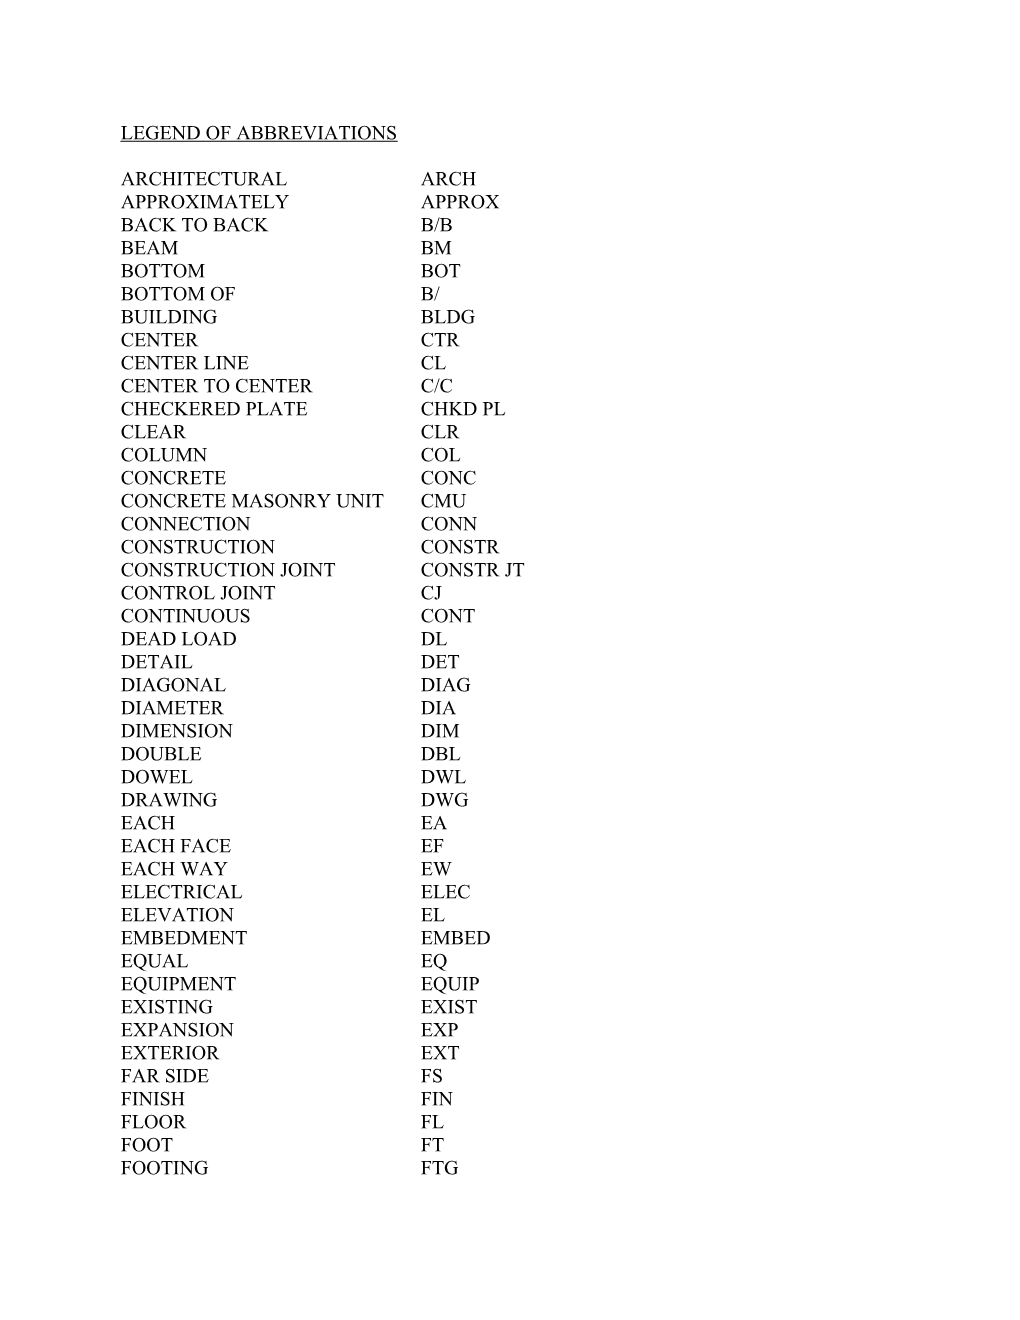 Abbreviations for Use on Drawings